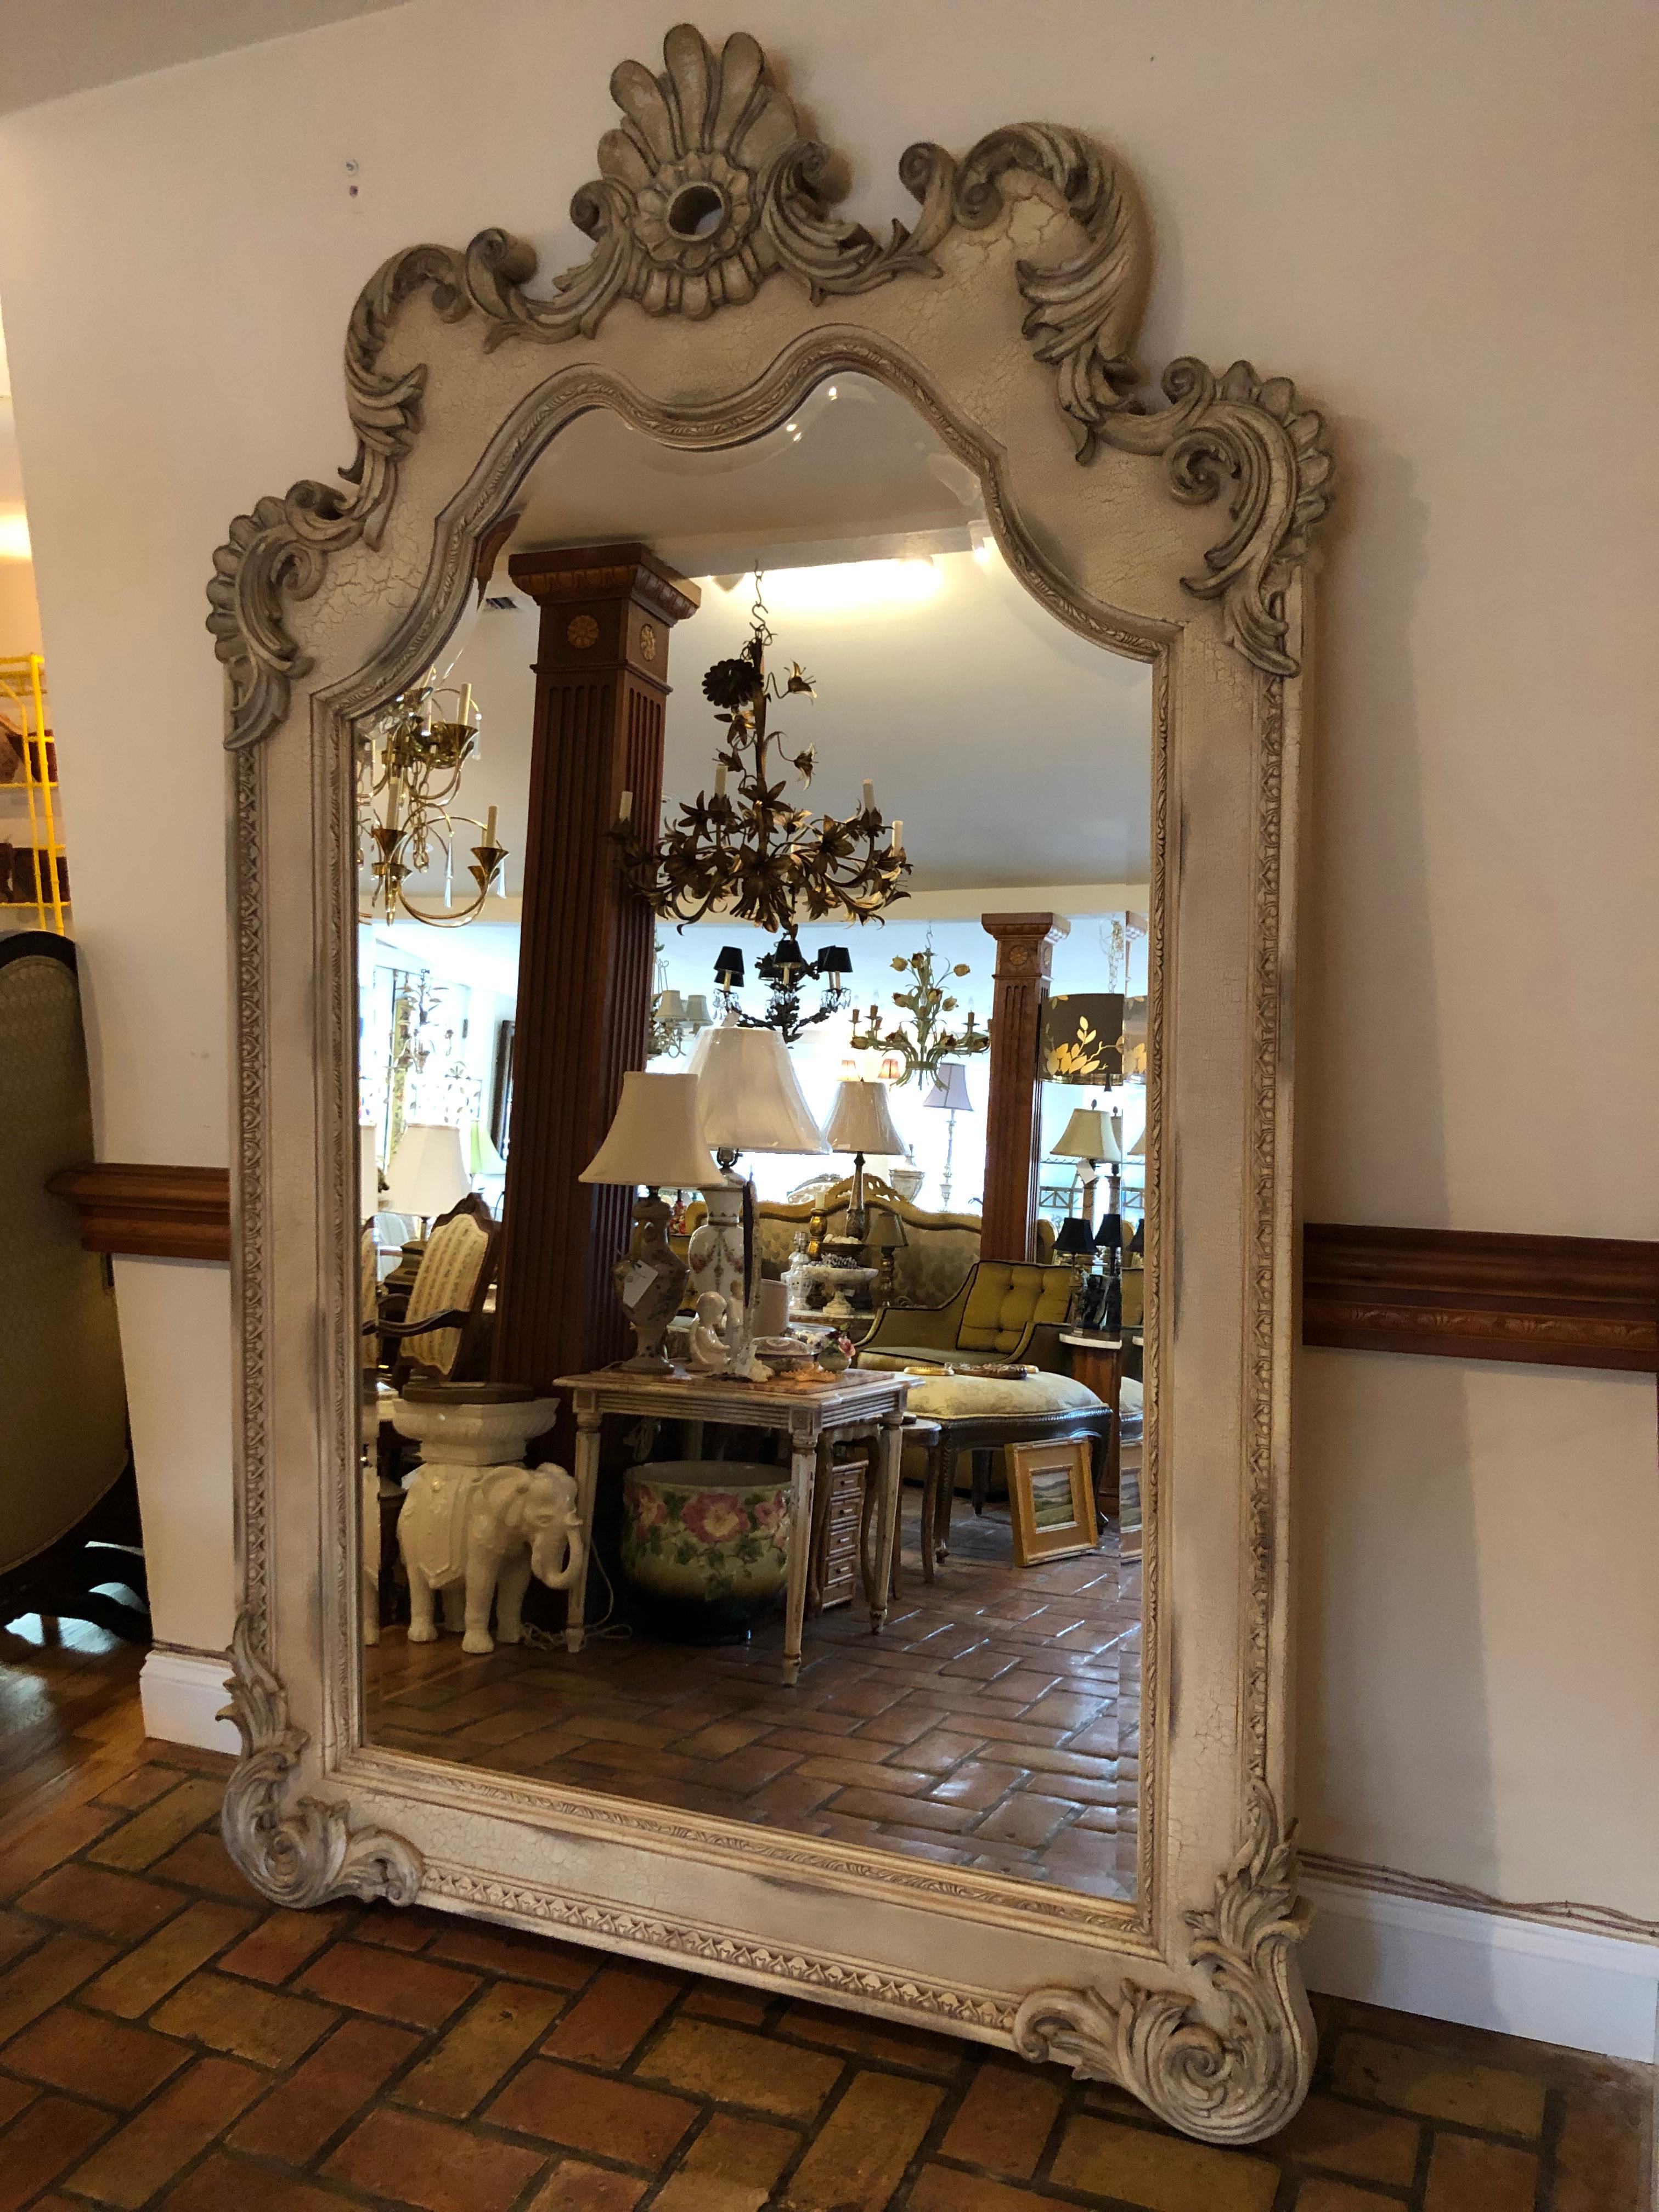 8 ft. Tall Hollywood Regency Style Leaning or Wall Mount Mirror 6